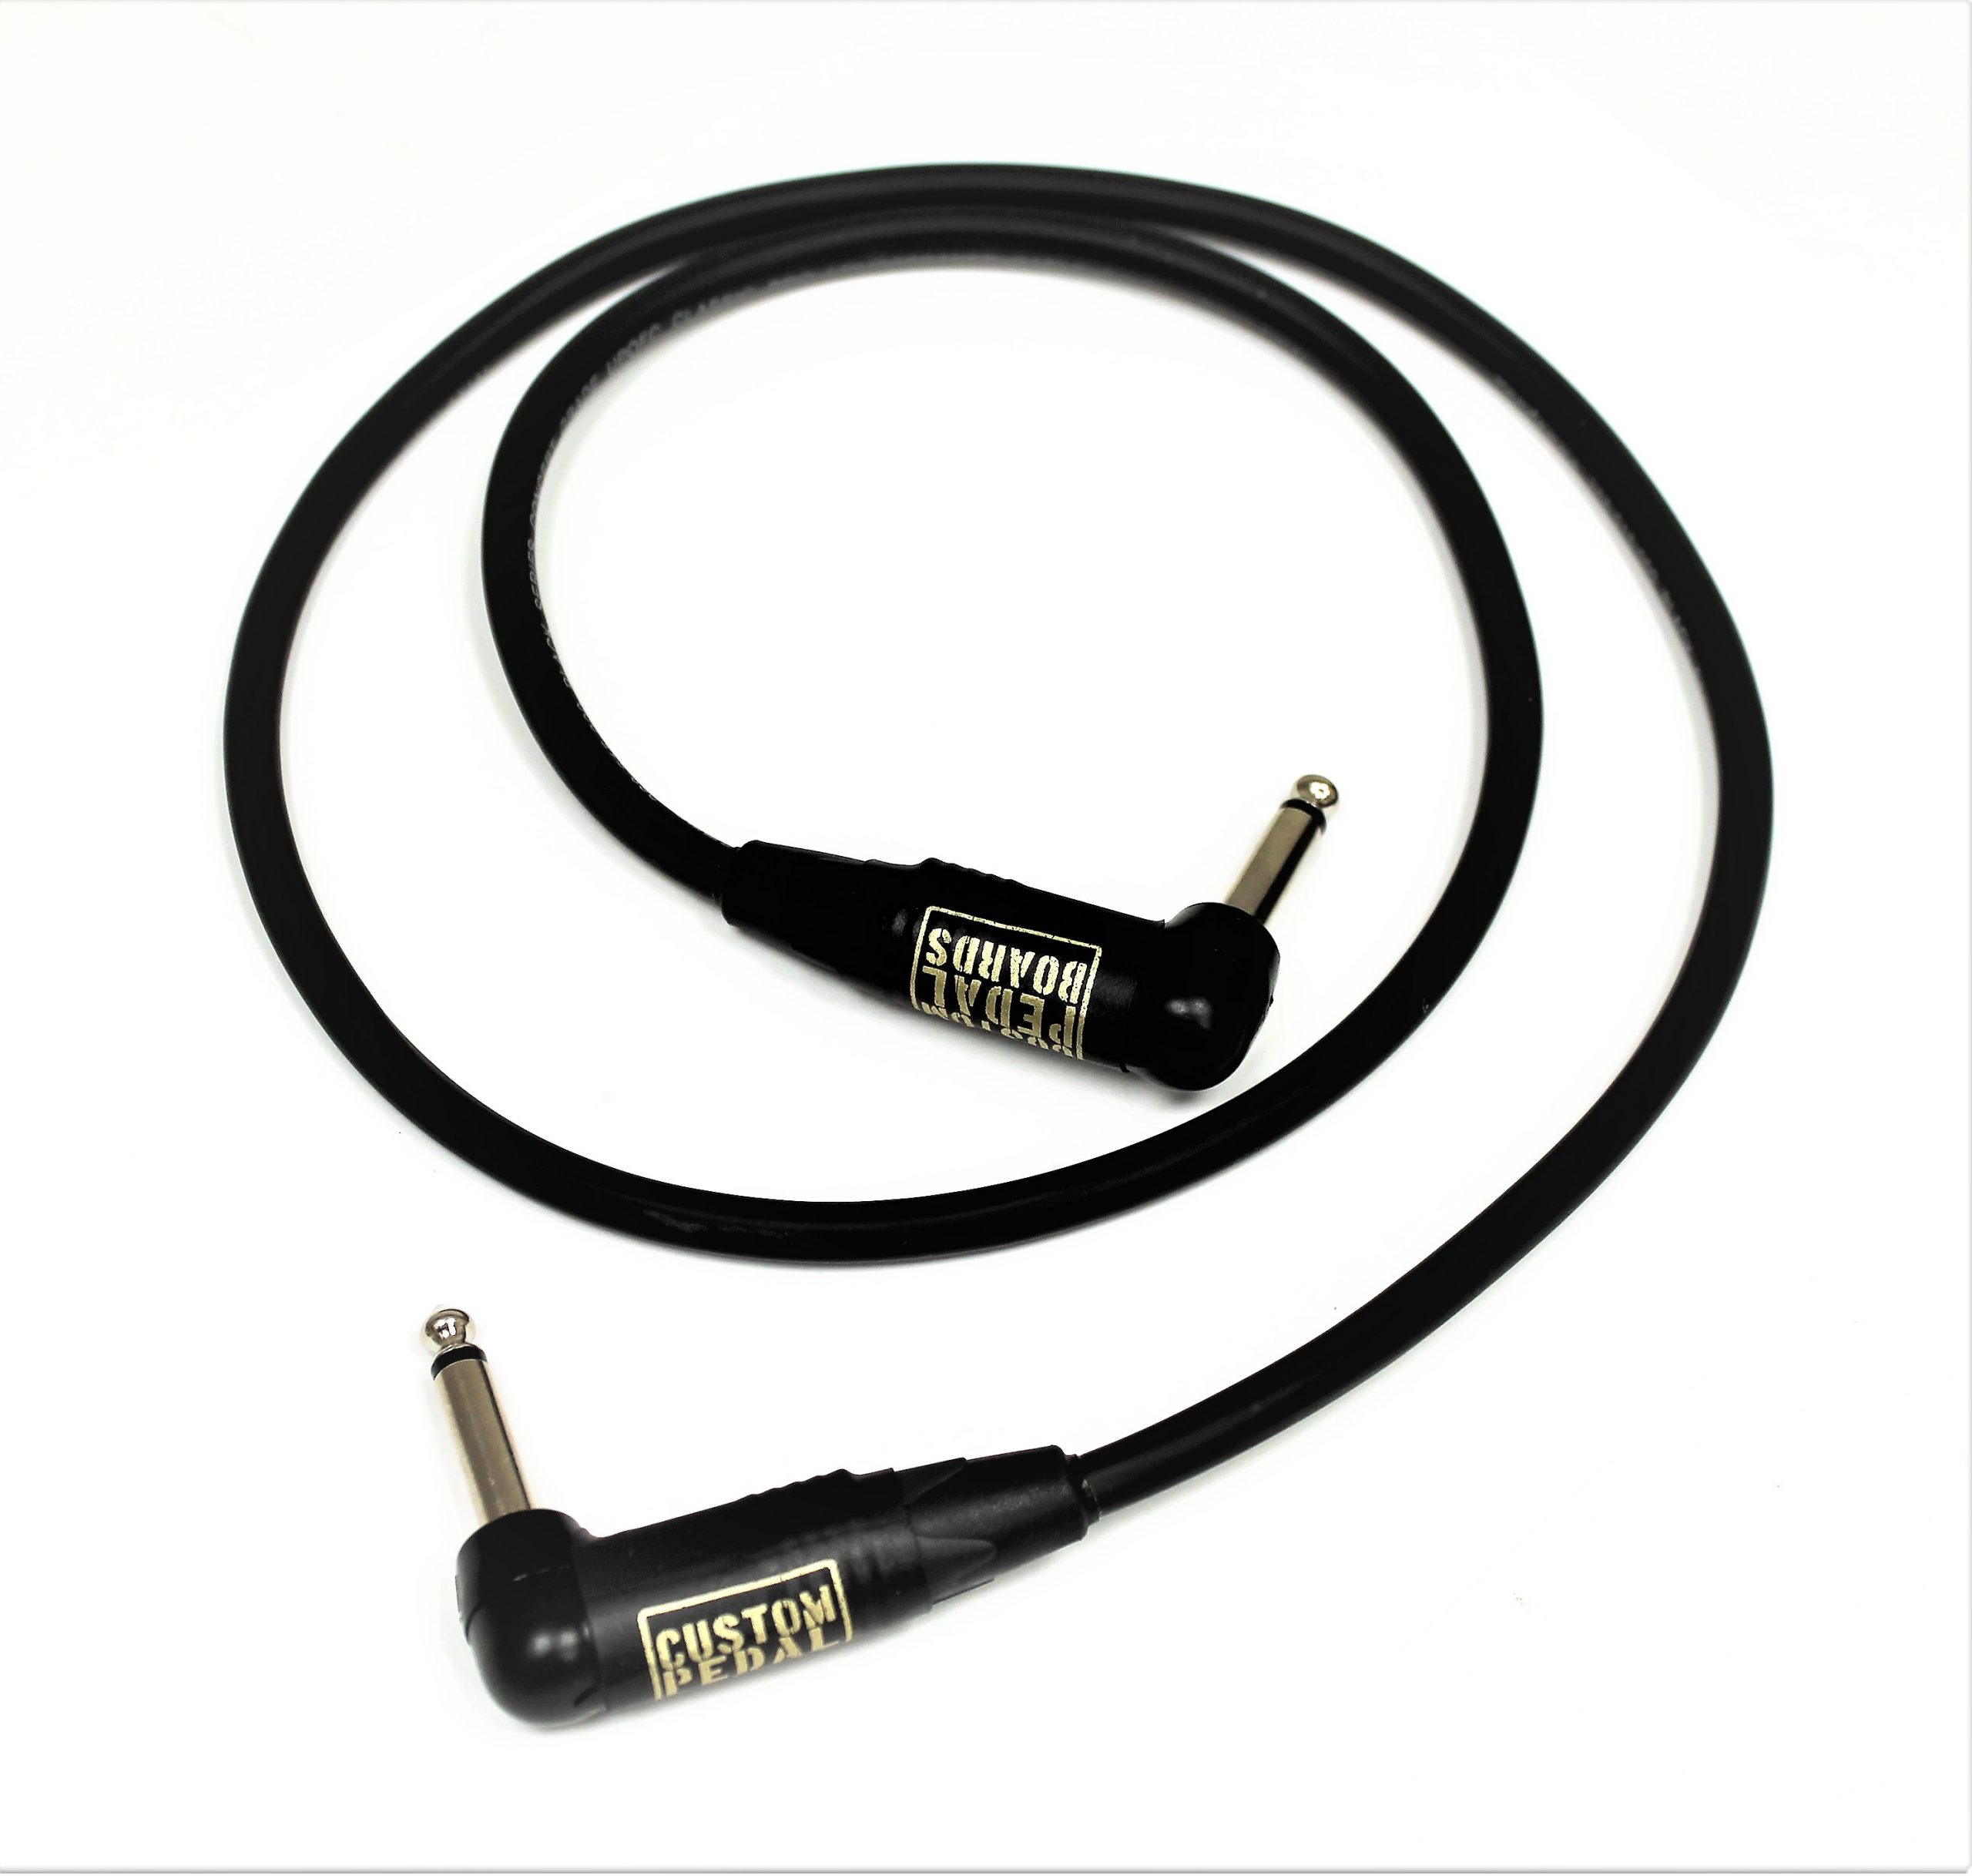 TOUR GRADE Angled Jack to Jack Speaker Lead. Van Damme Cable